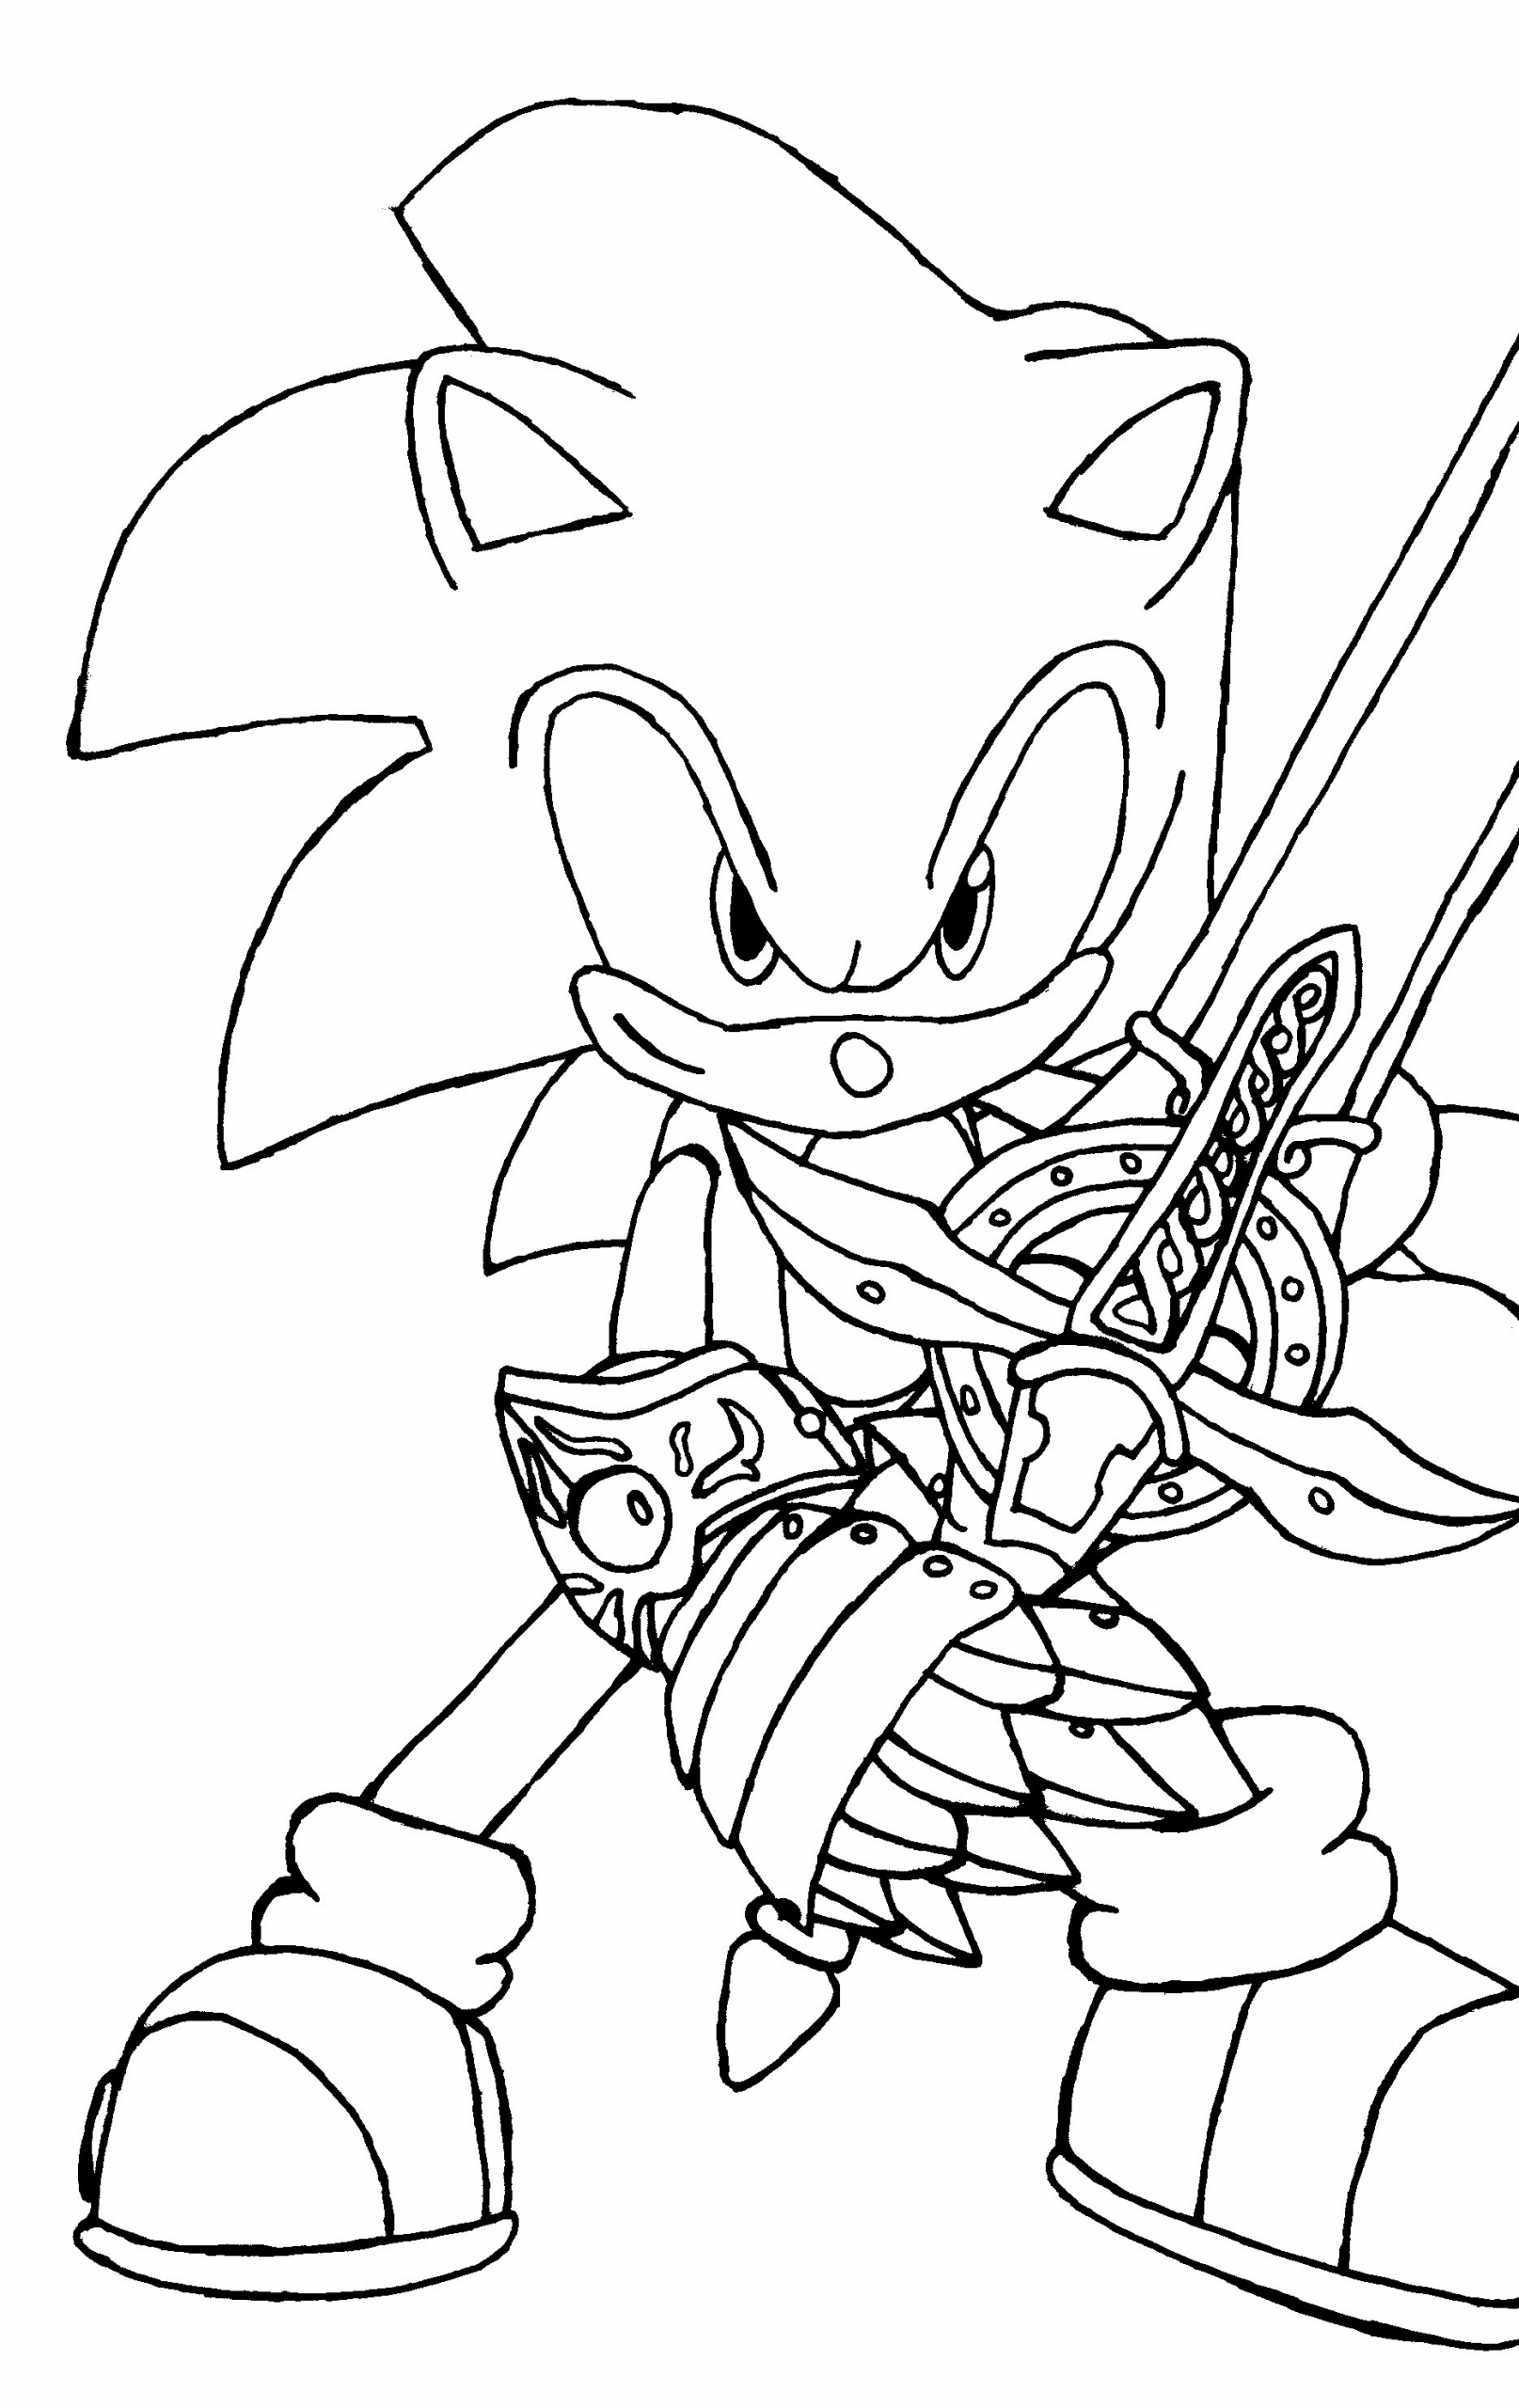 Kids Coloring Pages Printable
 Free Printable Sonic The Hedgehog Coloring Pages For Kids